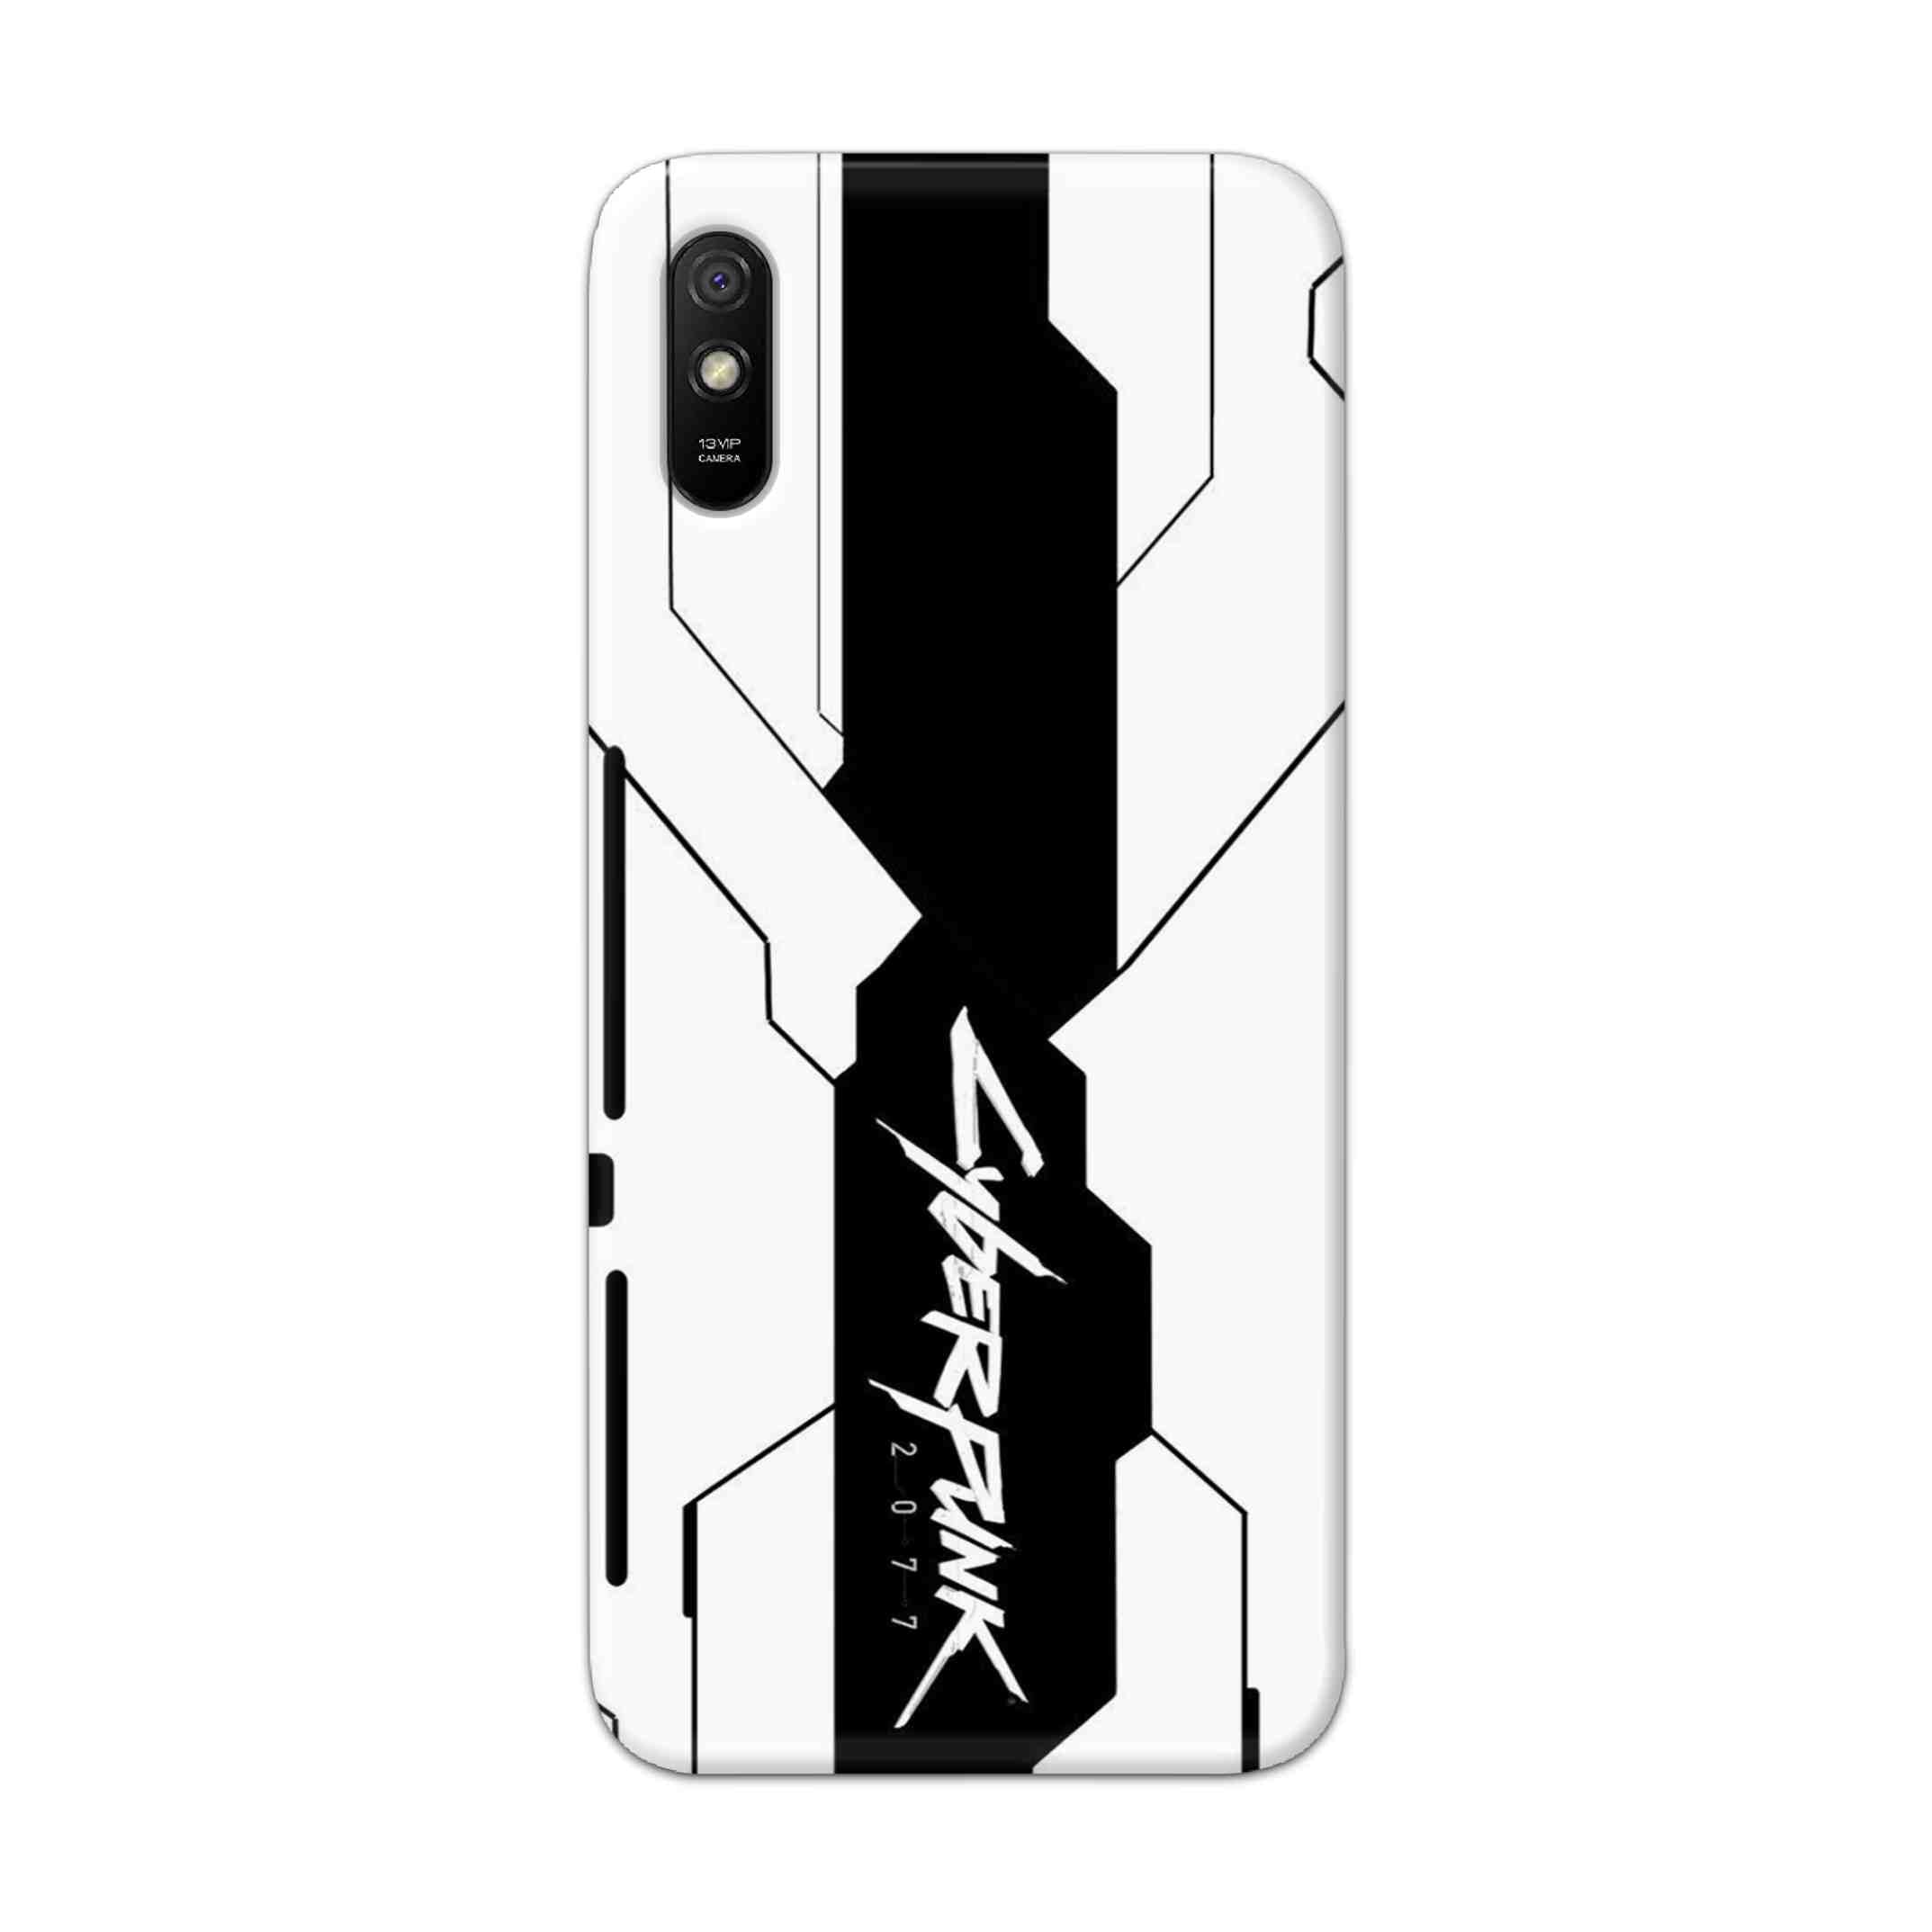 Buy Cyberpunk 2077 Hard Back Mobile Phone Case Cover For Redmi 9A Online